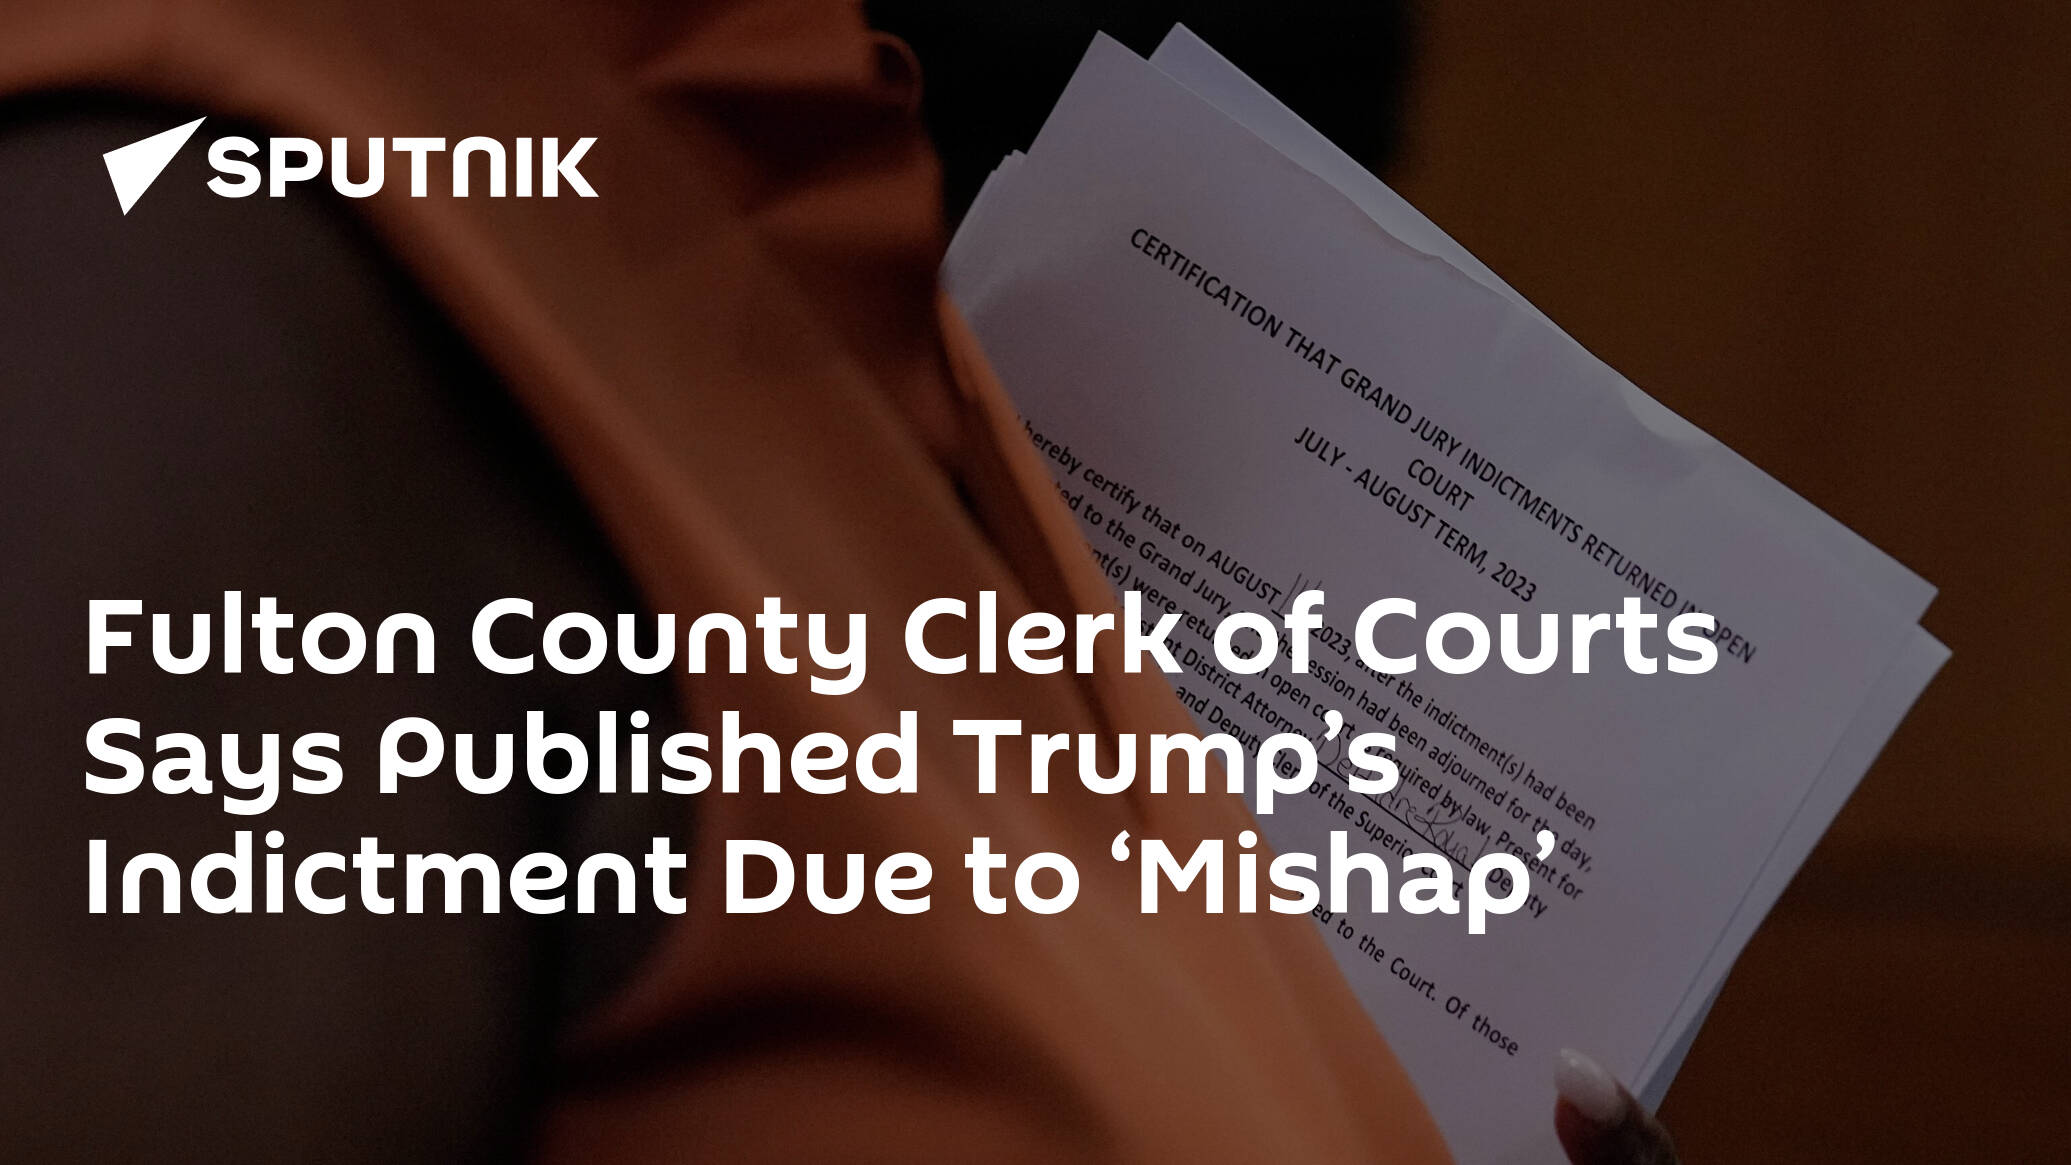 Fulton County Clerk of Courts Says Published Trump’s Indictment Due to ‘Mishap’